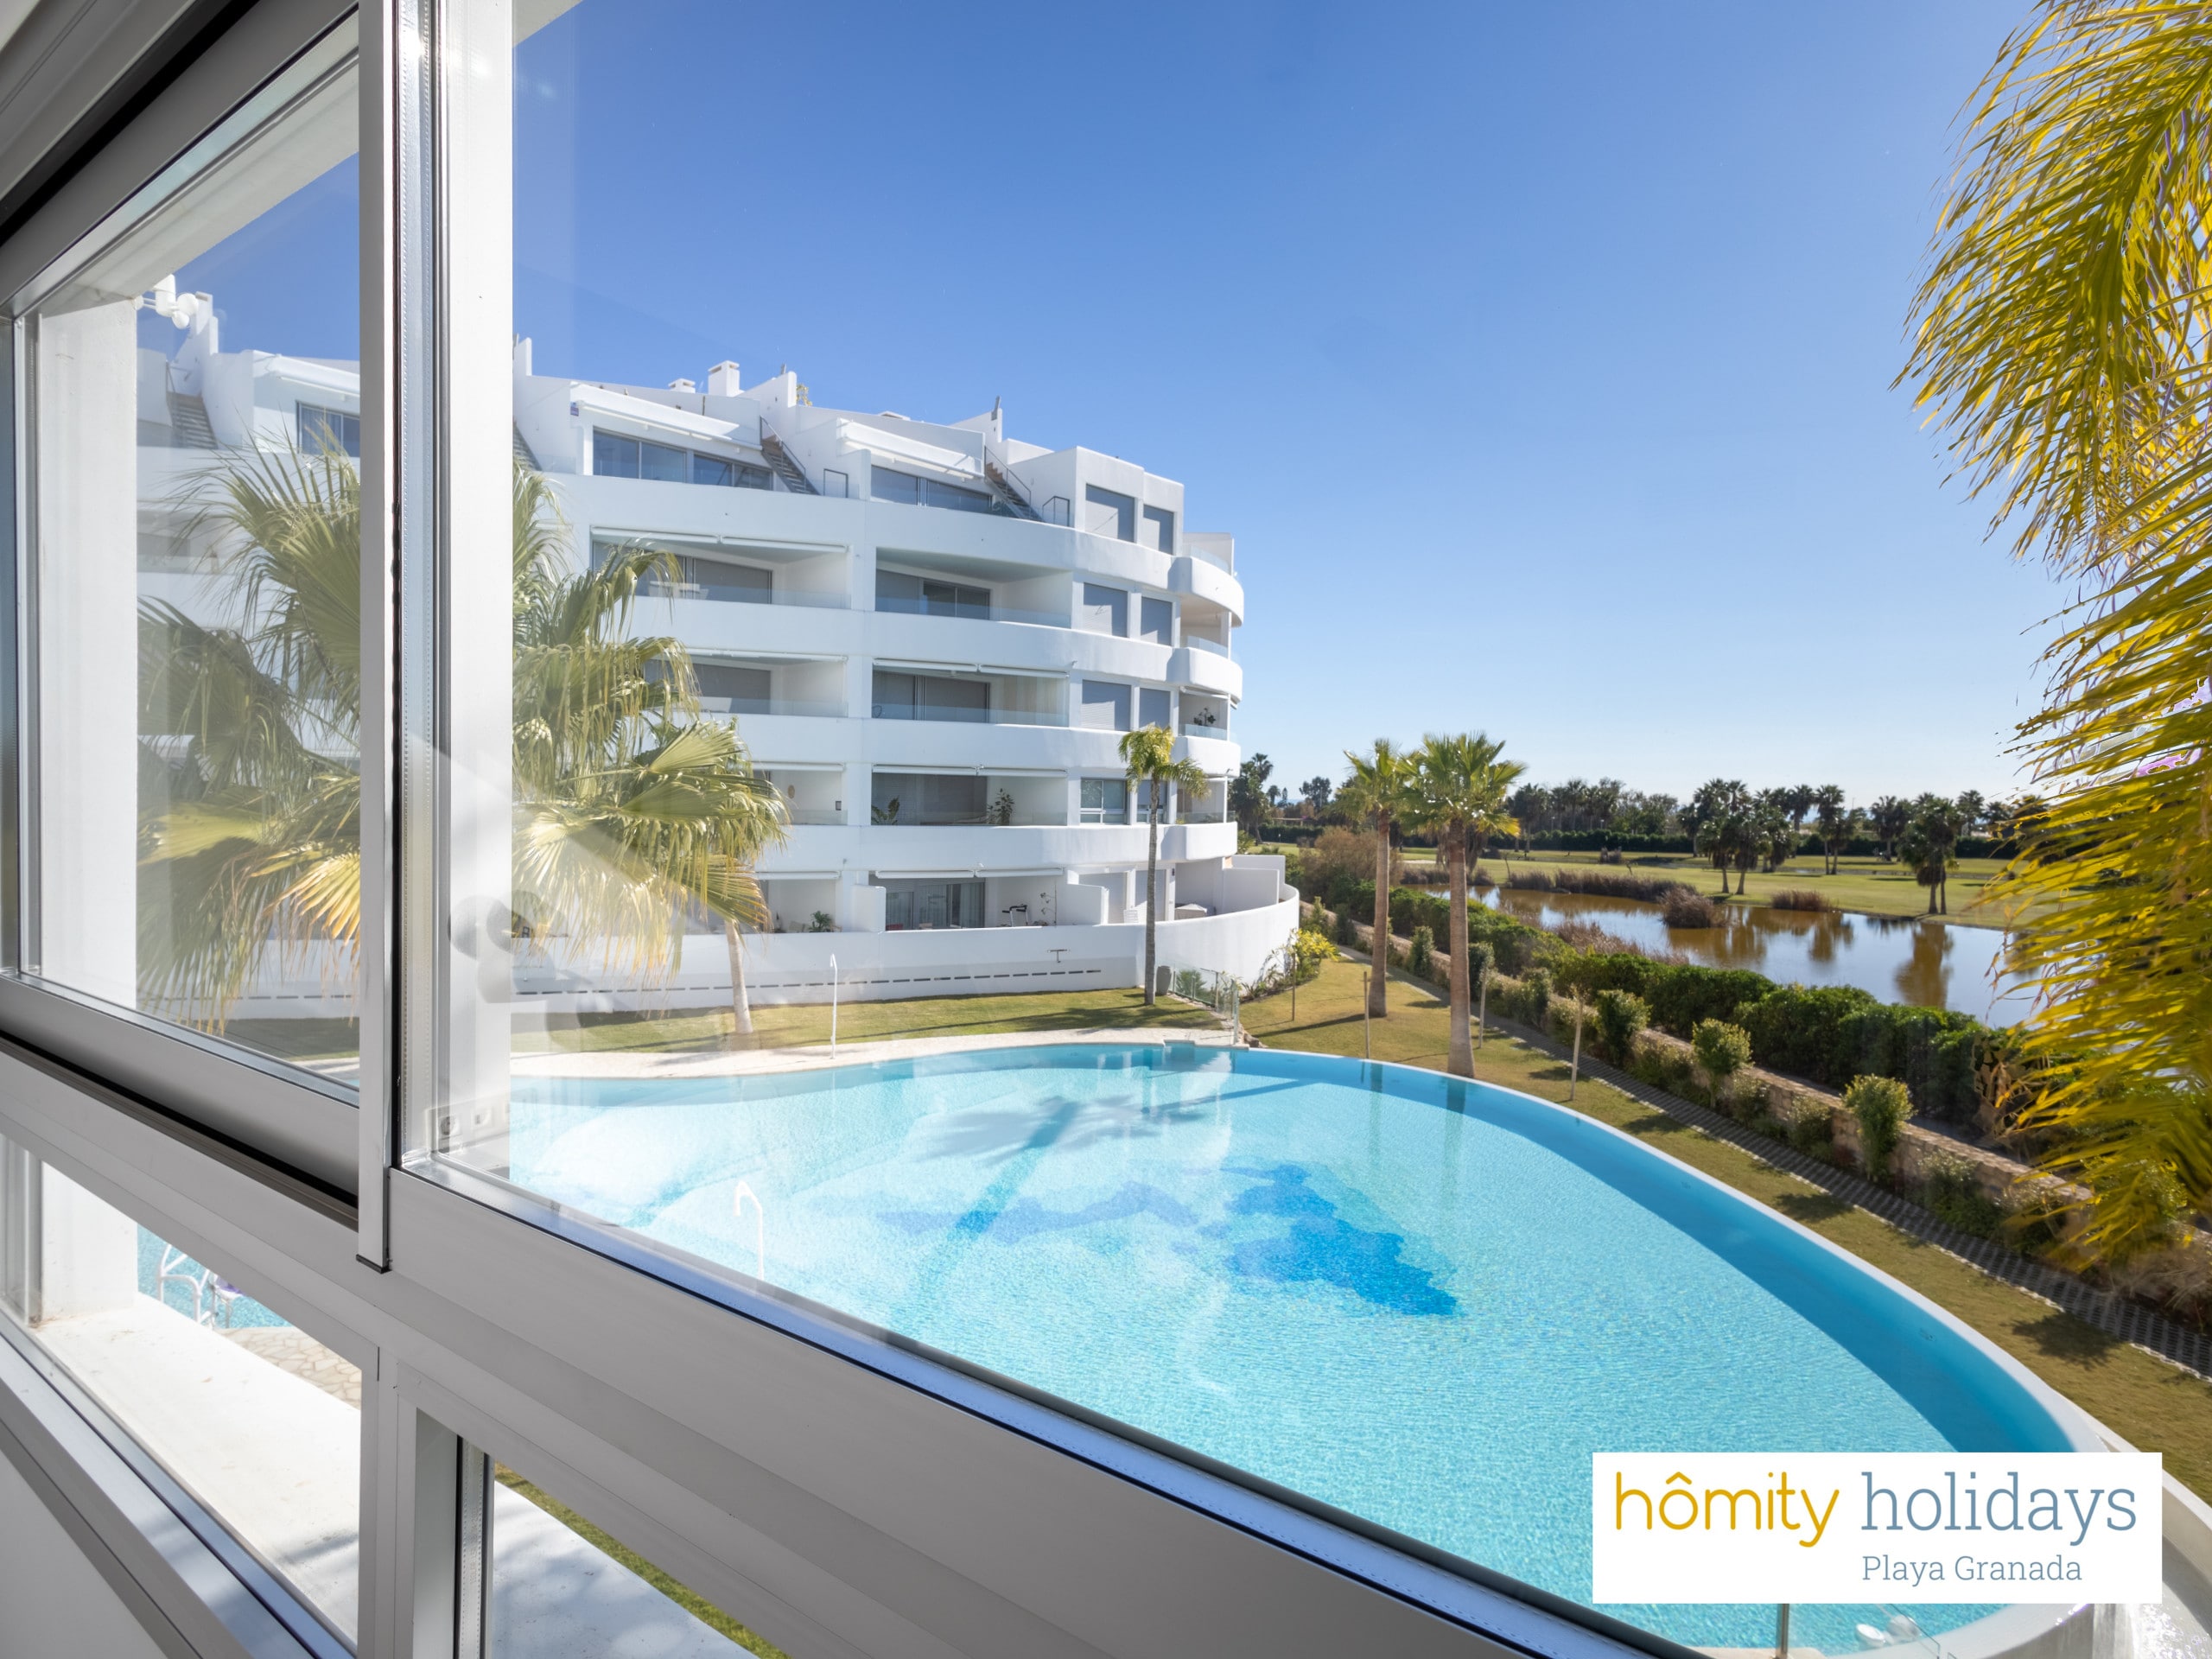 Property Image 2 - 2 bedroom and 2 bathroom exclusive apartment overlooking the golf course and the infinity swimming pool